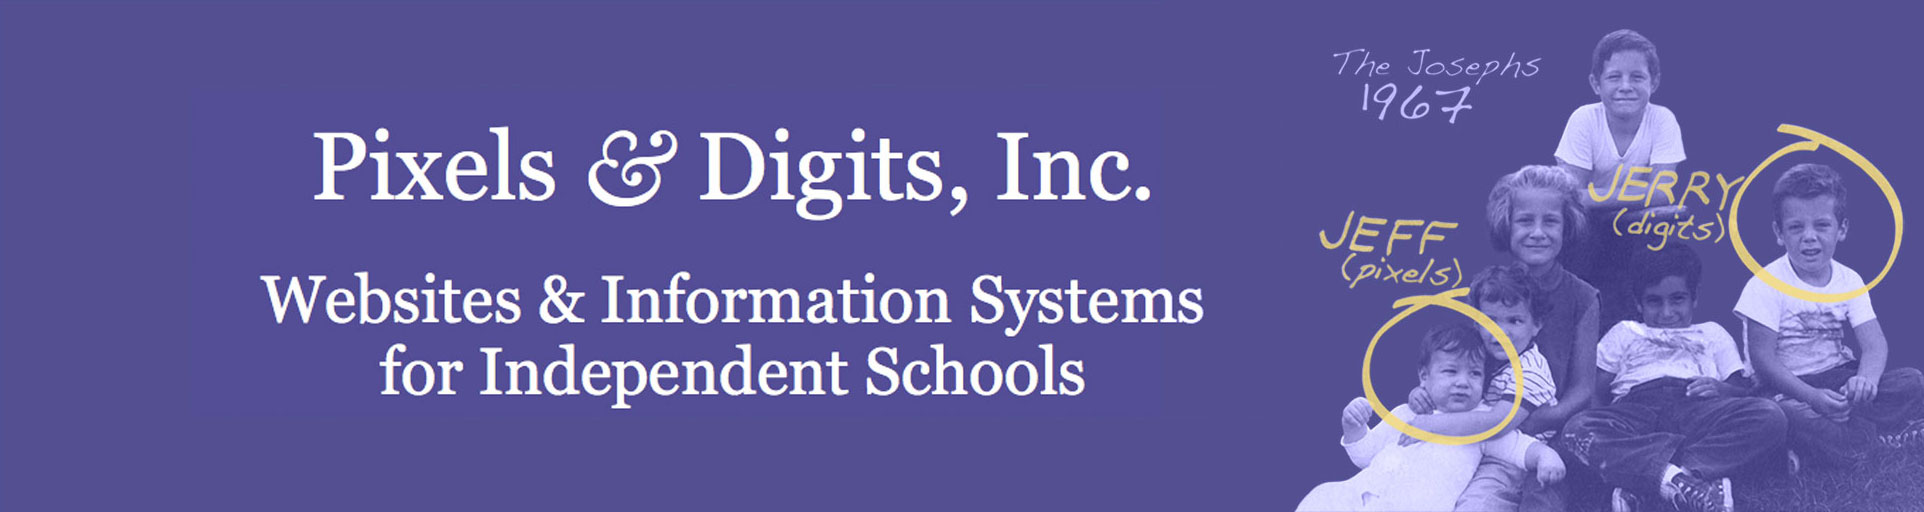 Pixels & Digits, Inc. Websites and Information Systems for Independent Schools